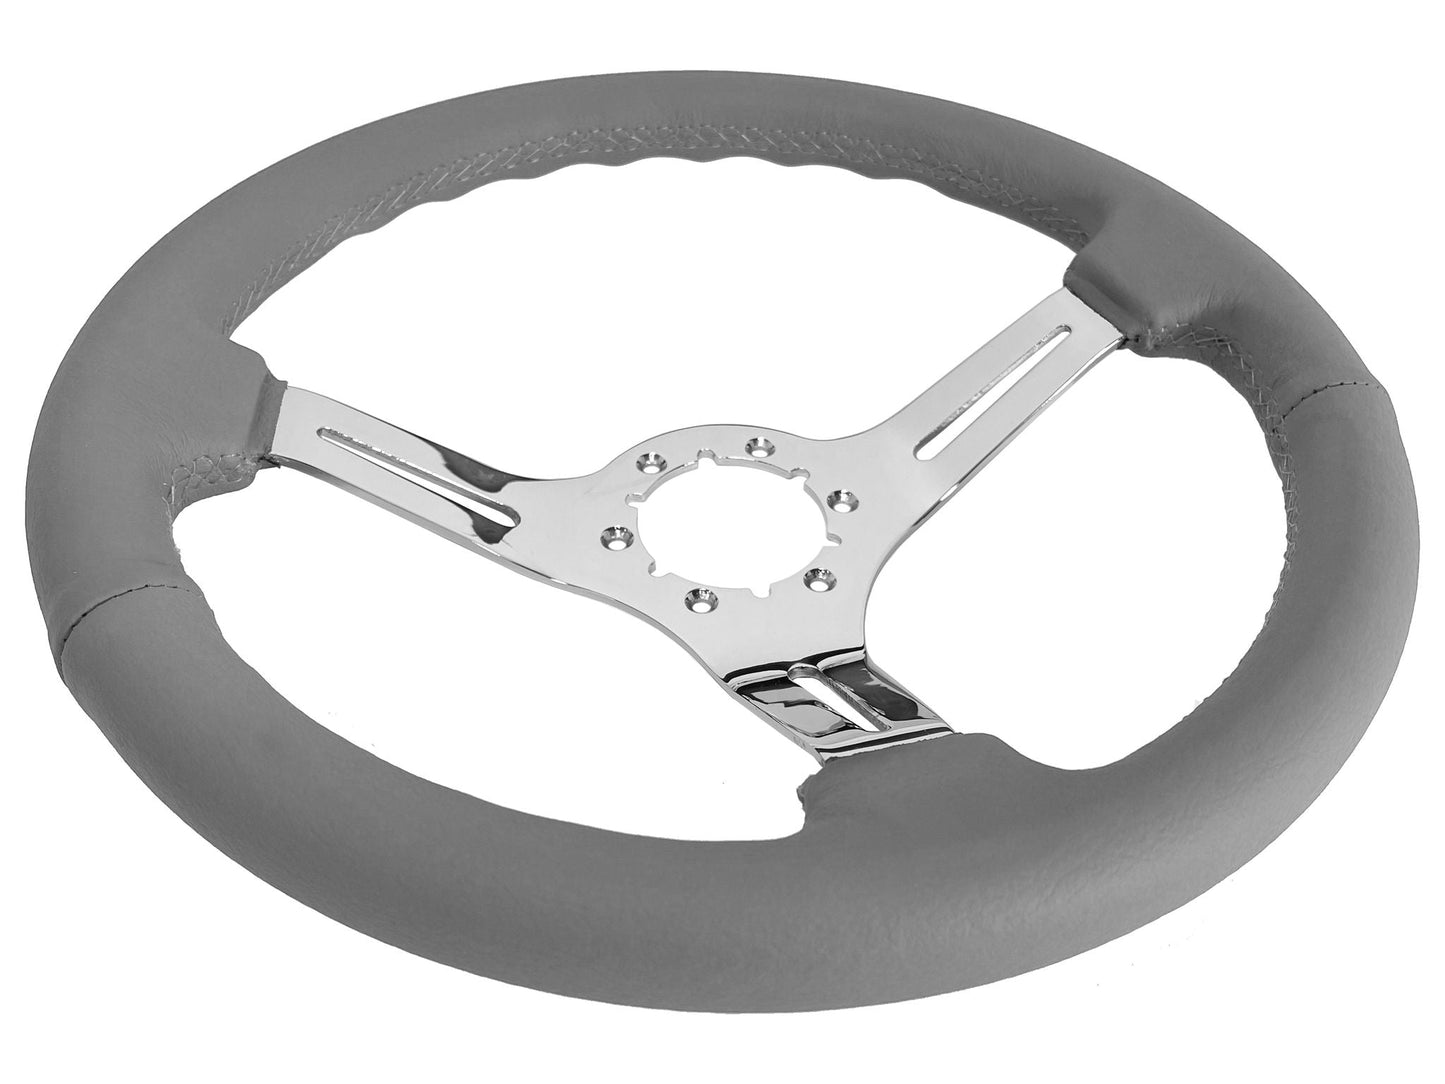 1965-69 Ford Ranchero Steering Wheel Kit | Grey Leather | ST3012GRY